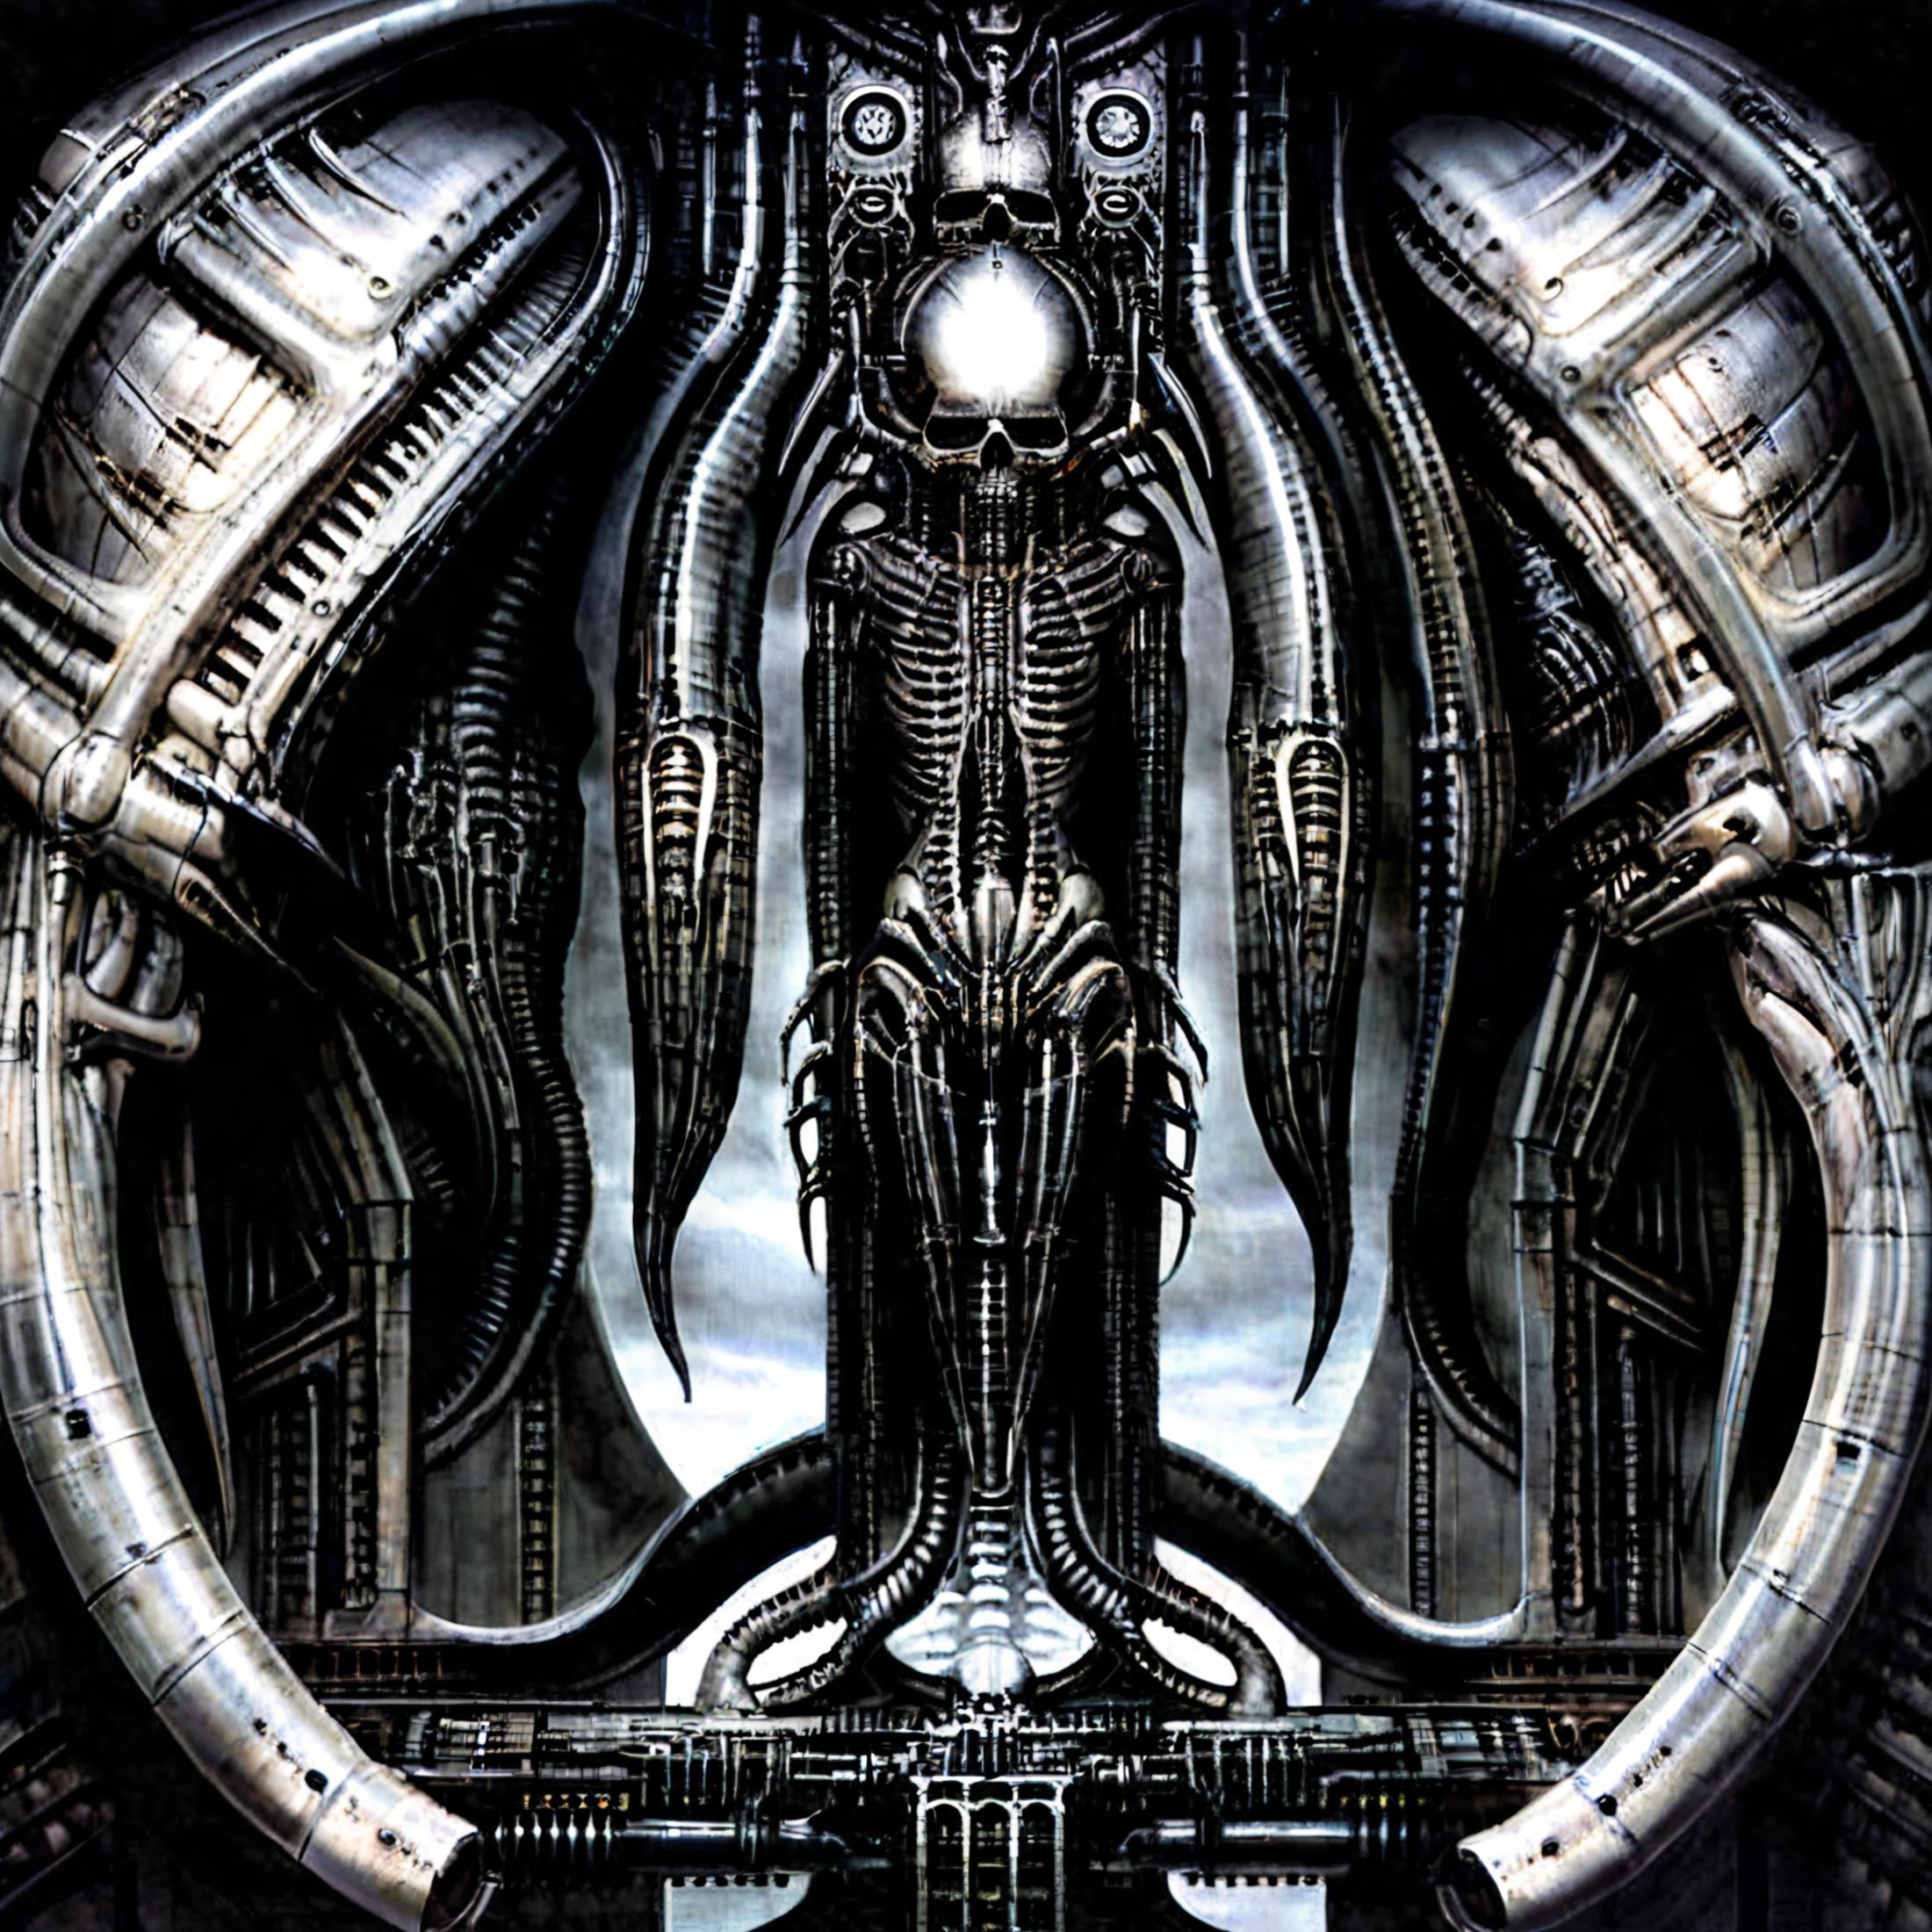 H. R. Giger SDXL 1.0 art style lora image by Crazysloth